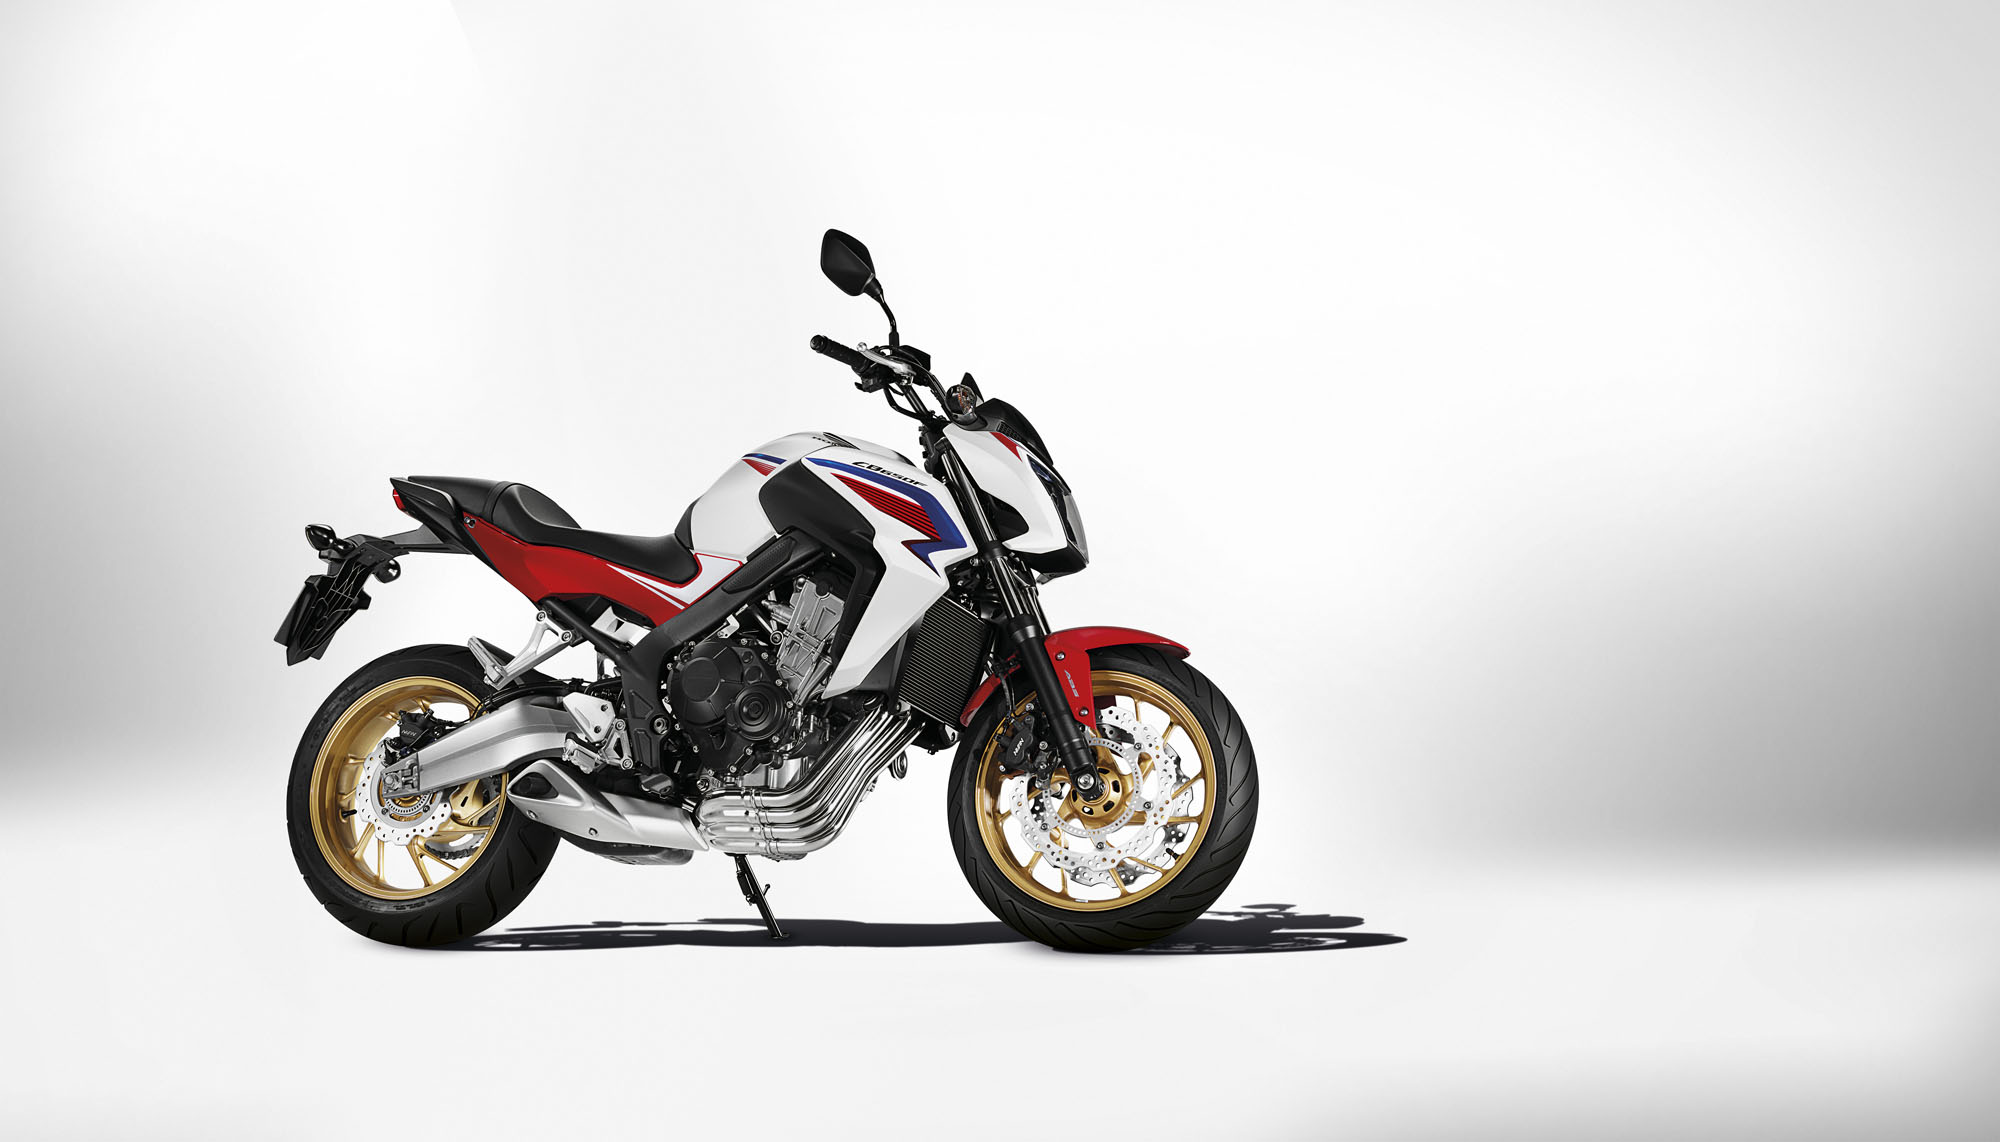 Two new Honda 650s unveiled